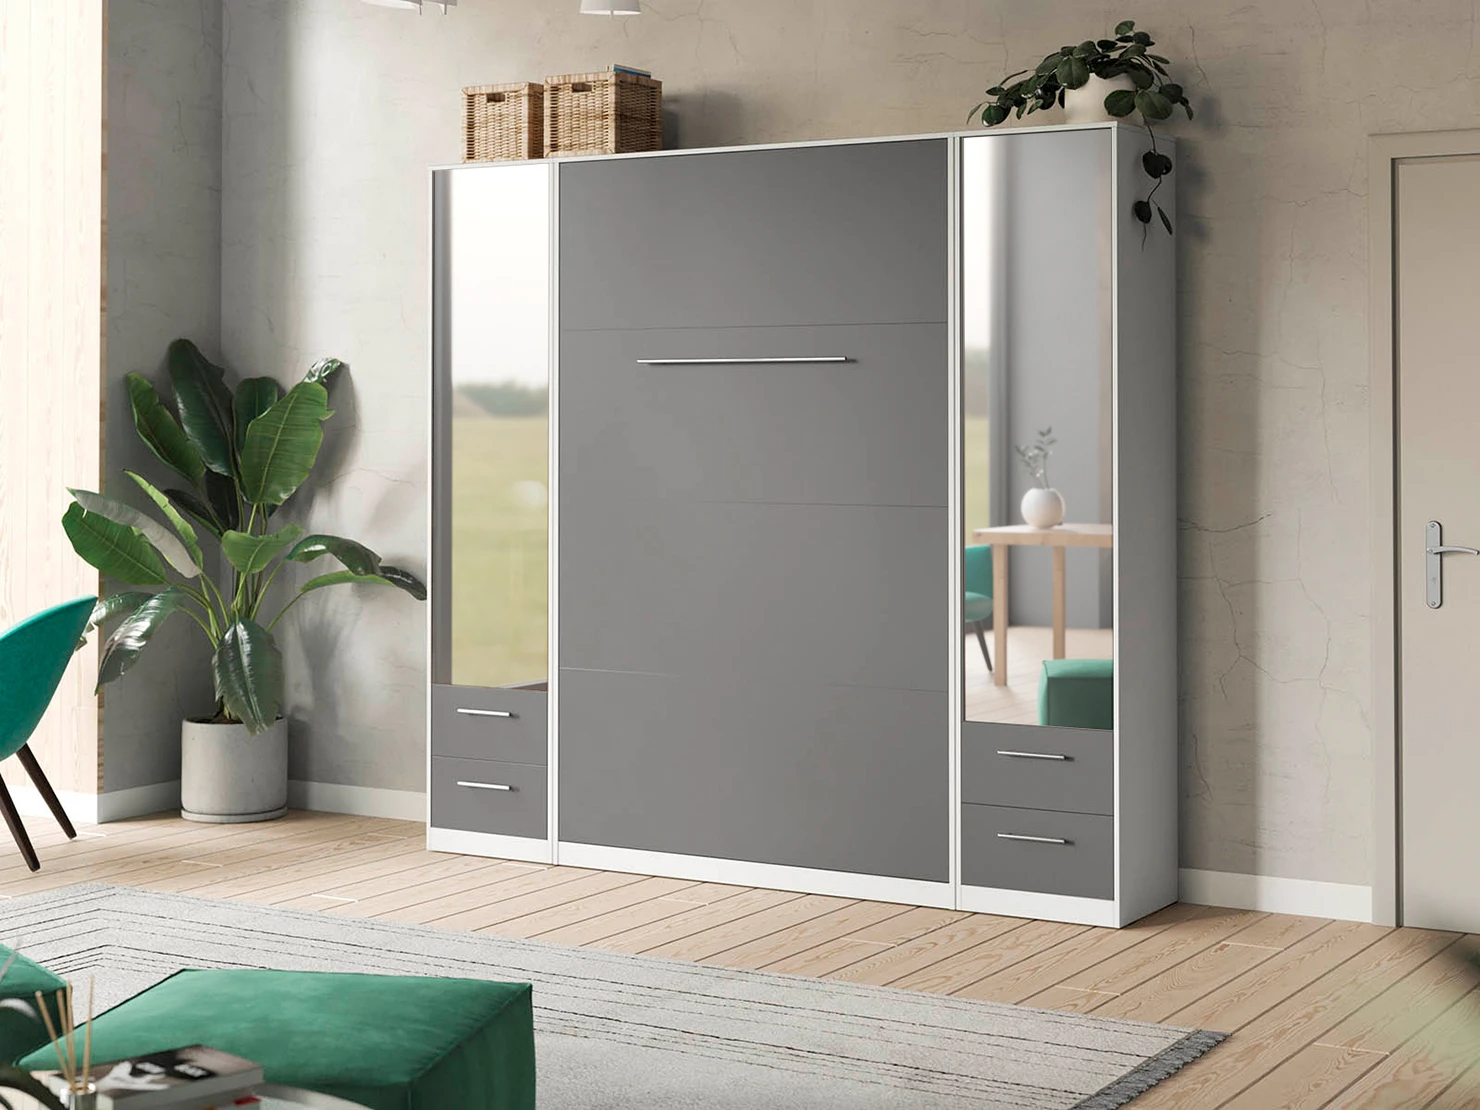 1 Murphy Bed SET 140x200cm Vertical + 2x Cabinets 50cm White/Anthracite with Mirror